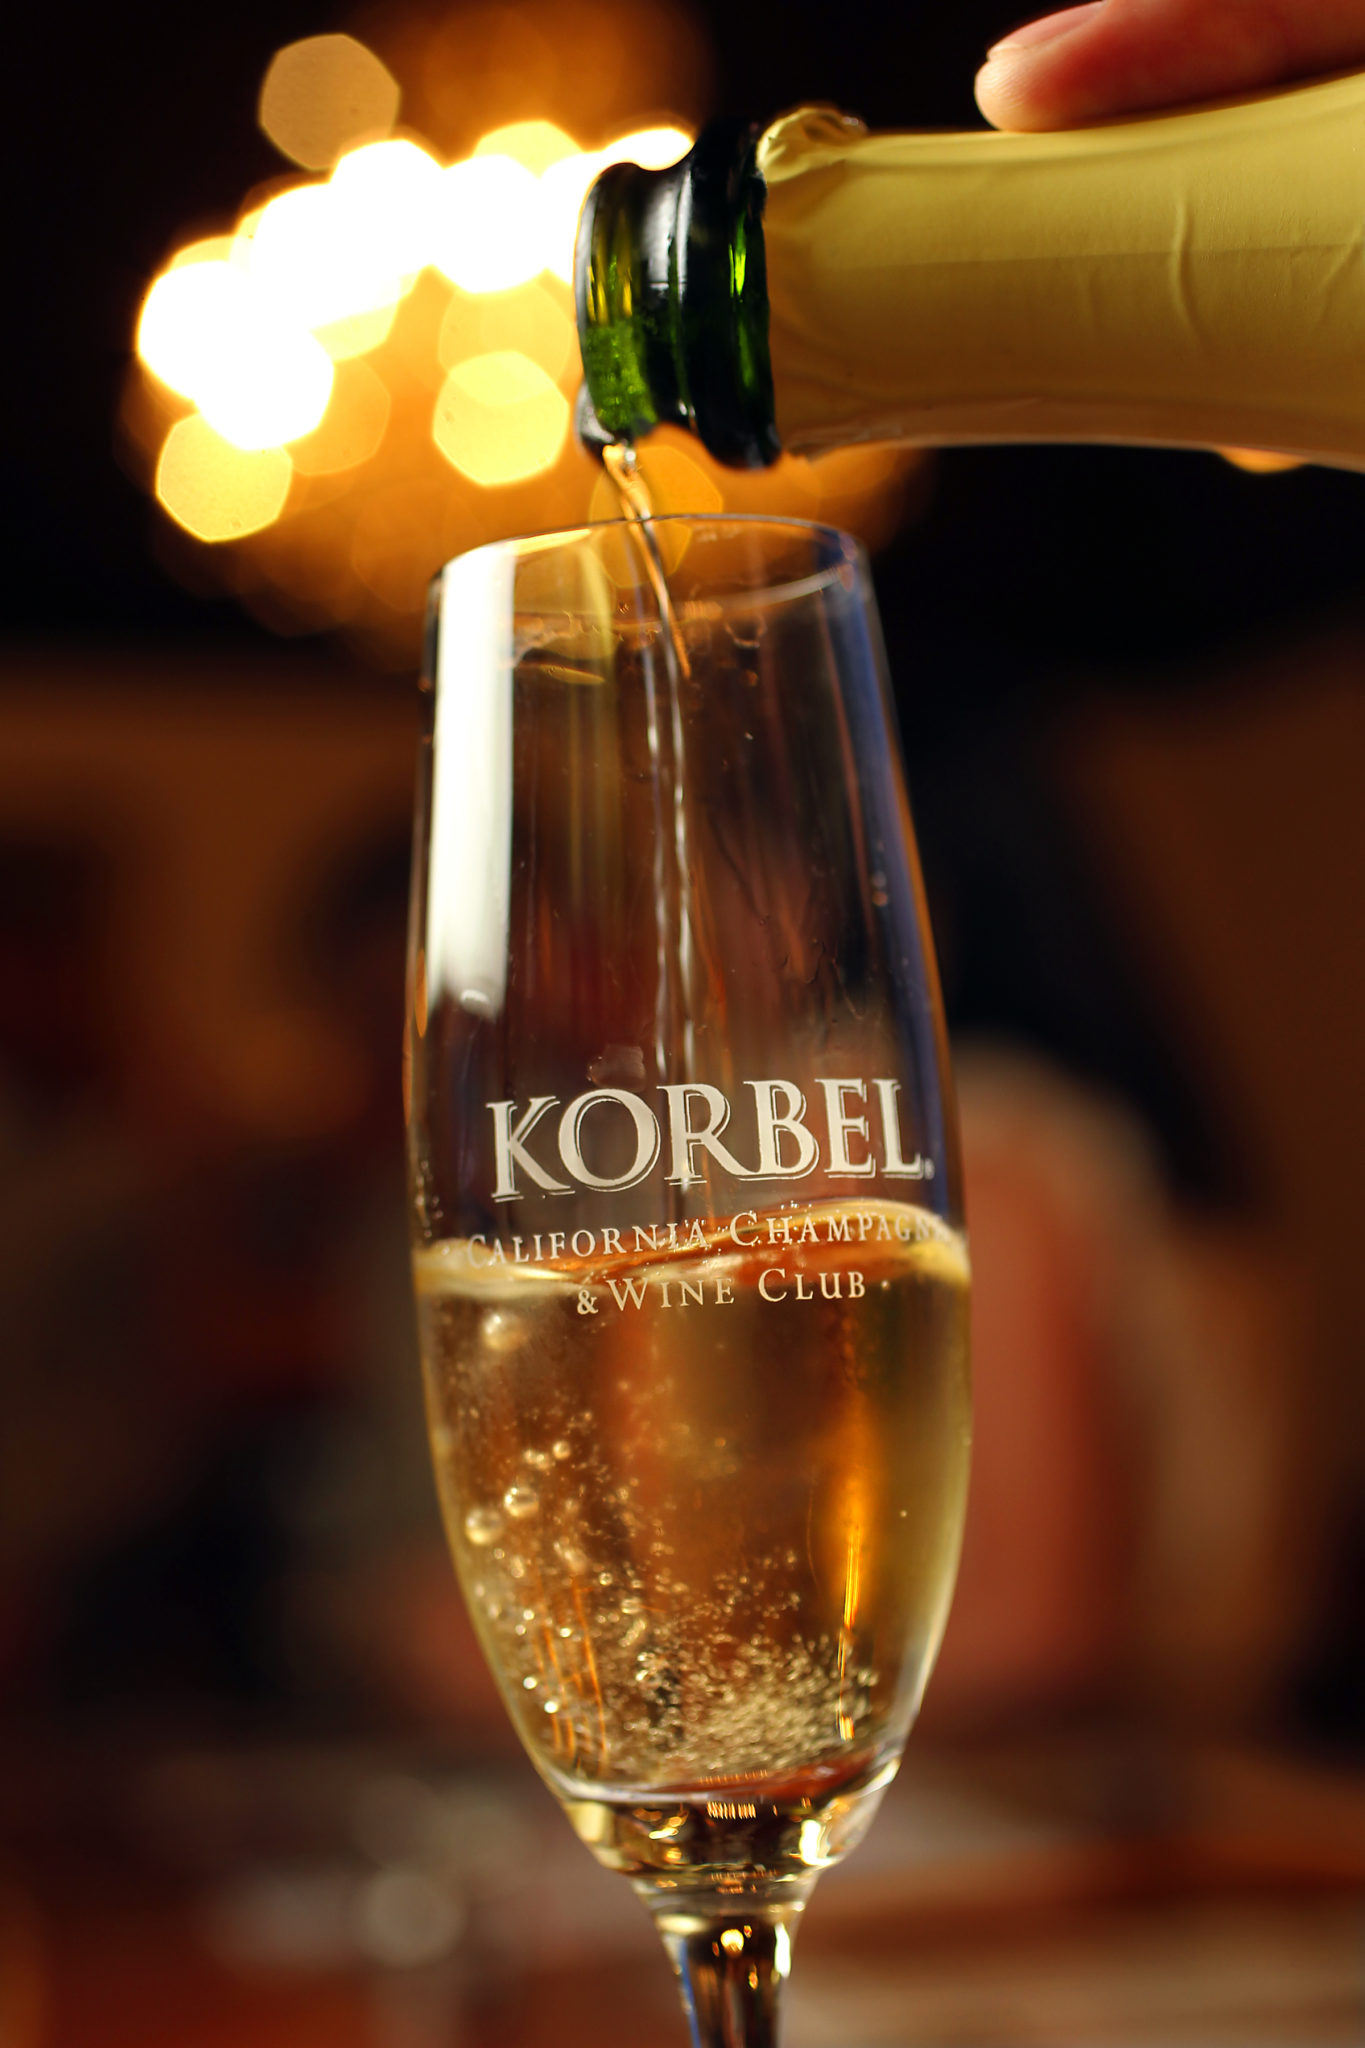 1/11/2013: A1: PC: Visitors enjoy a glass of champagne at Korbel Winery, who tied for Best Tasting Room in the the Press Democrat's Best of Sonoma County competition.